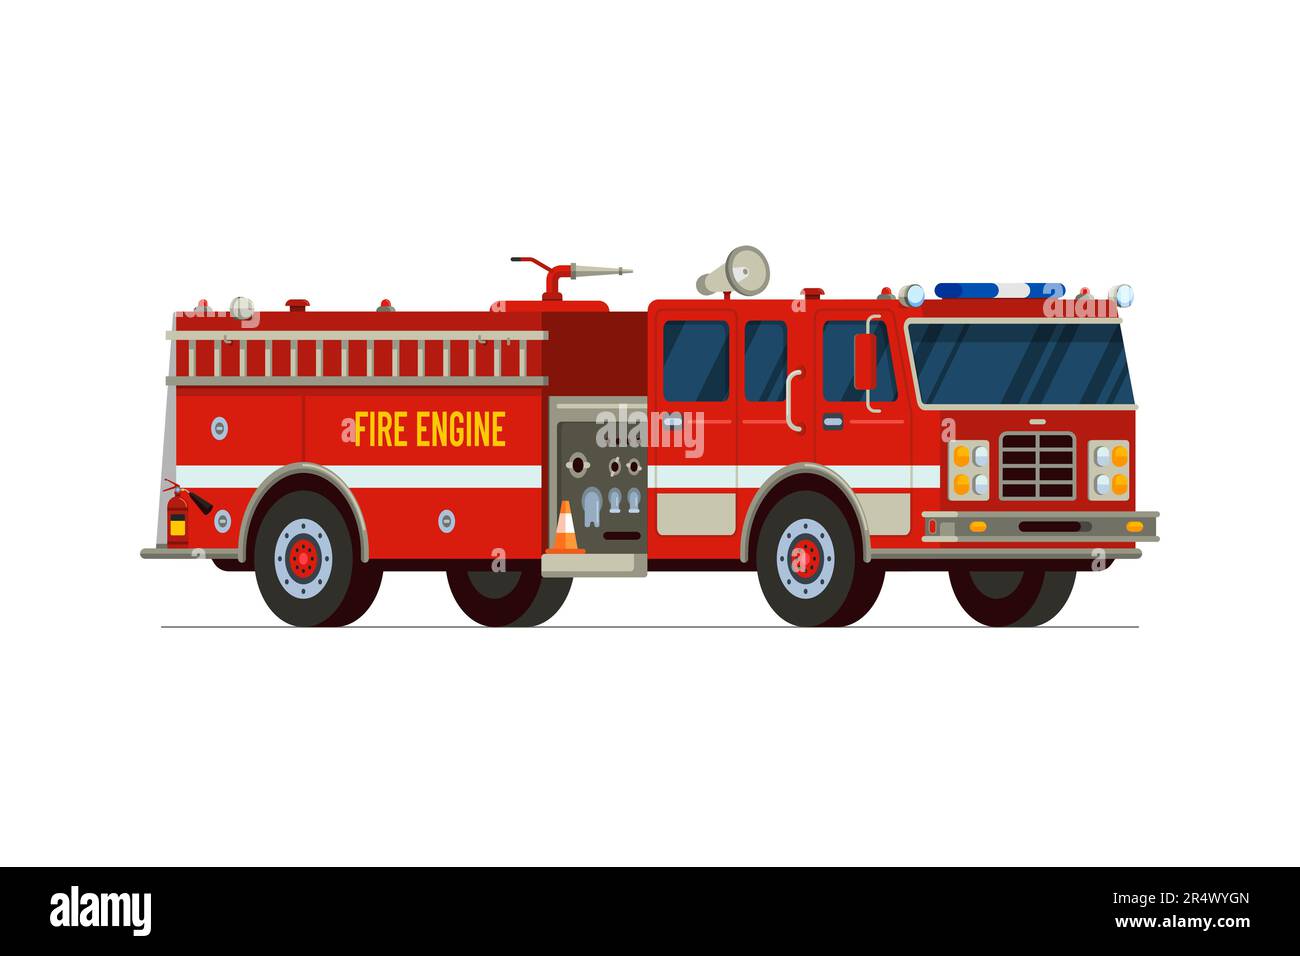 Fire engine truck isometric side front view. Firetruck car with Siren alarm and water tank. Firefighter red vehicle. Fireman emergency rescue transport. Firefighting lorry vector eps flat illustration Stock Vector